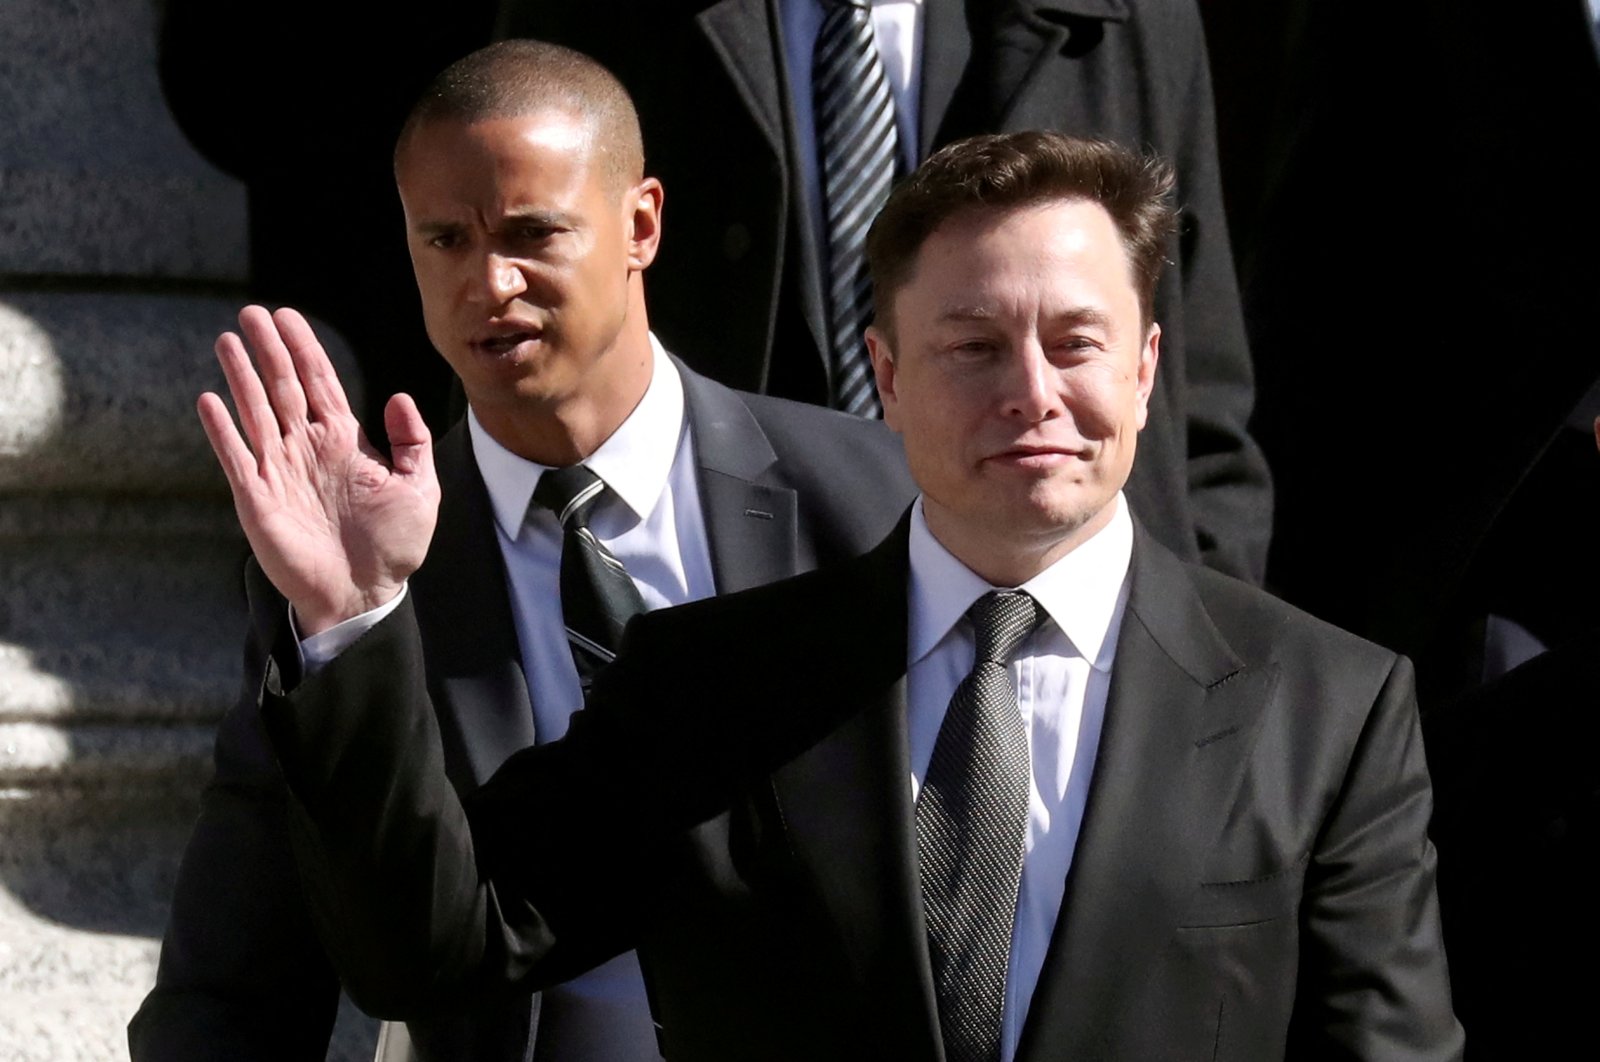 Tesla CEO Elon Musk leaves a Manhattan federal court after a hearing on his fraud settlement with the Securities and Exchange Commission (SEC) in New York City, U.S., April 4, 2019. (Reuters Photo)